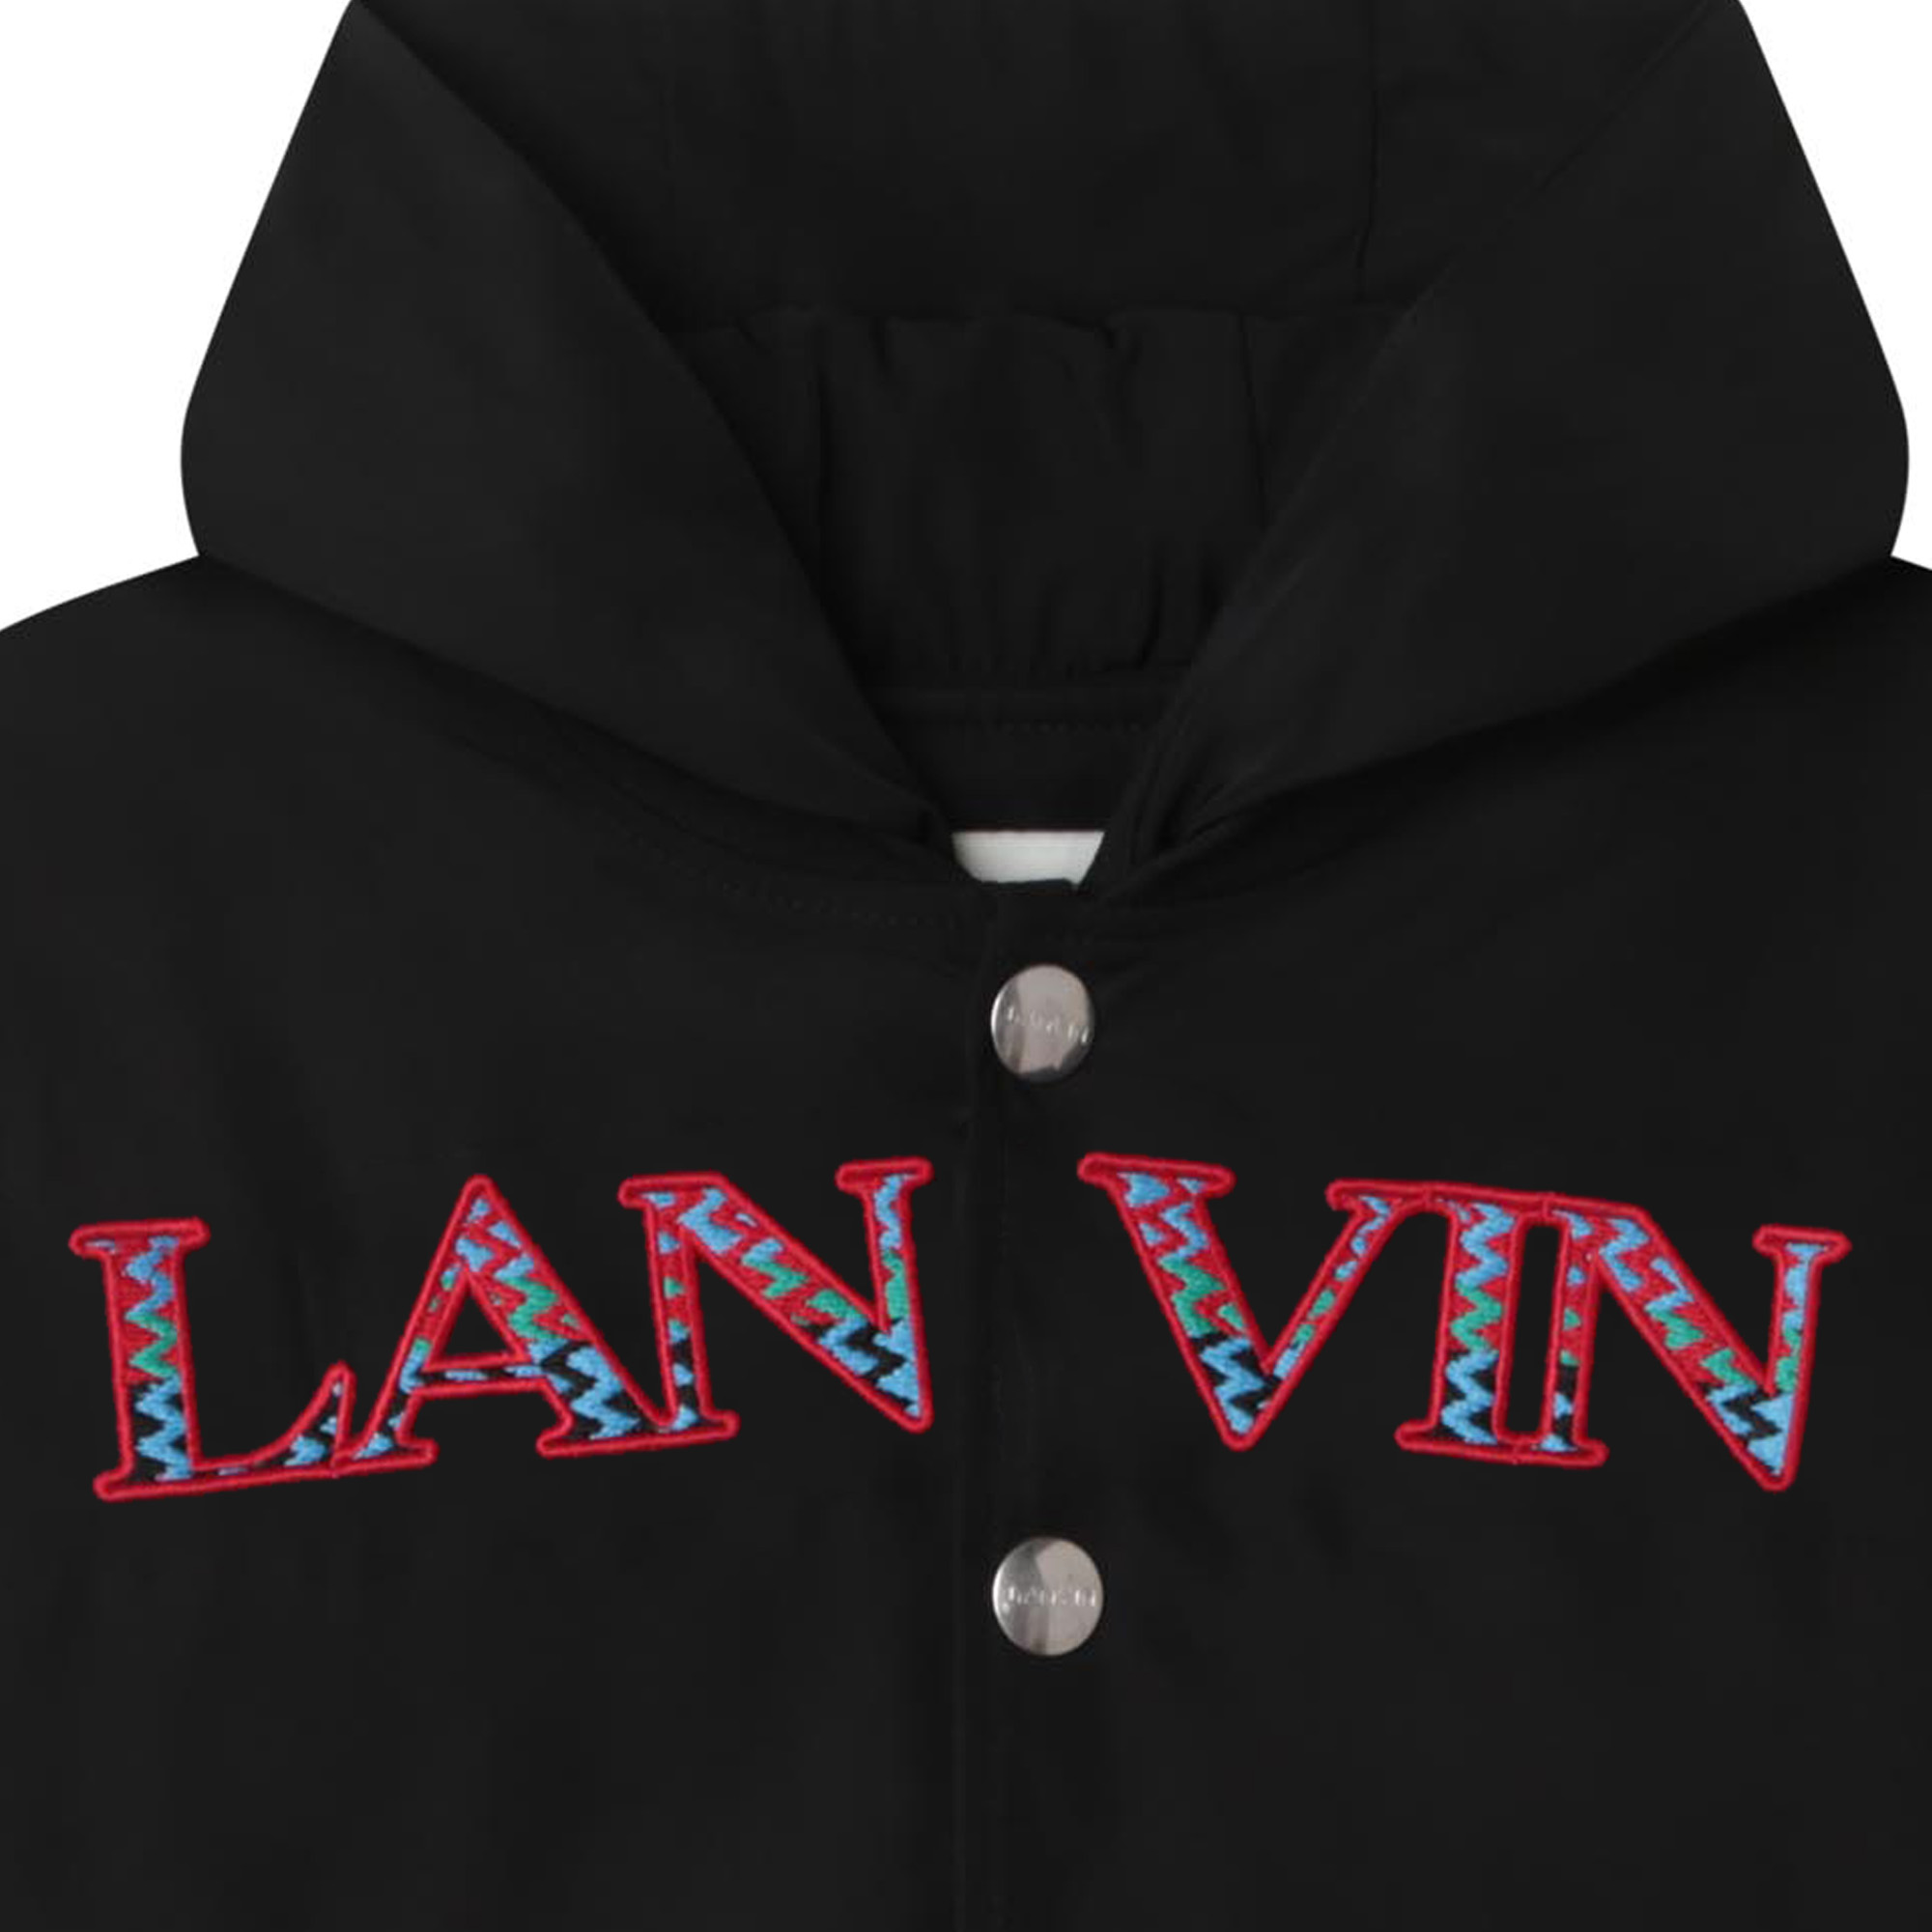 Jacket with logo LANVIN for BOY